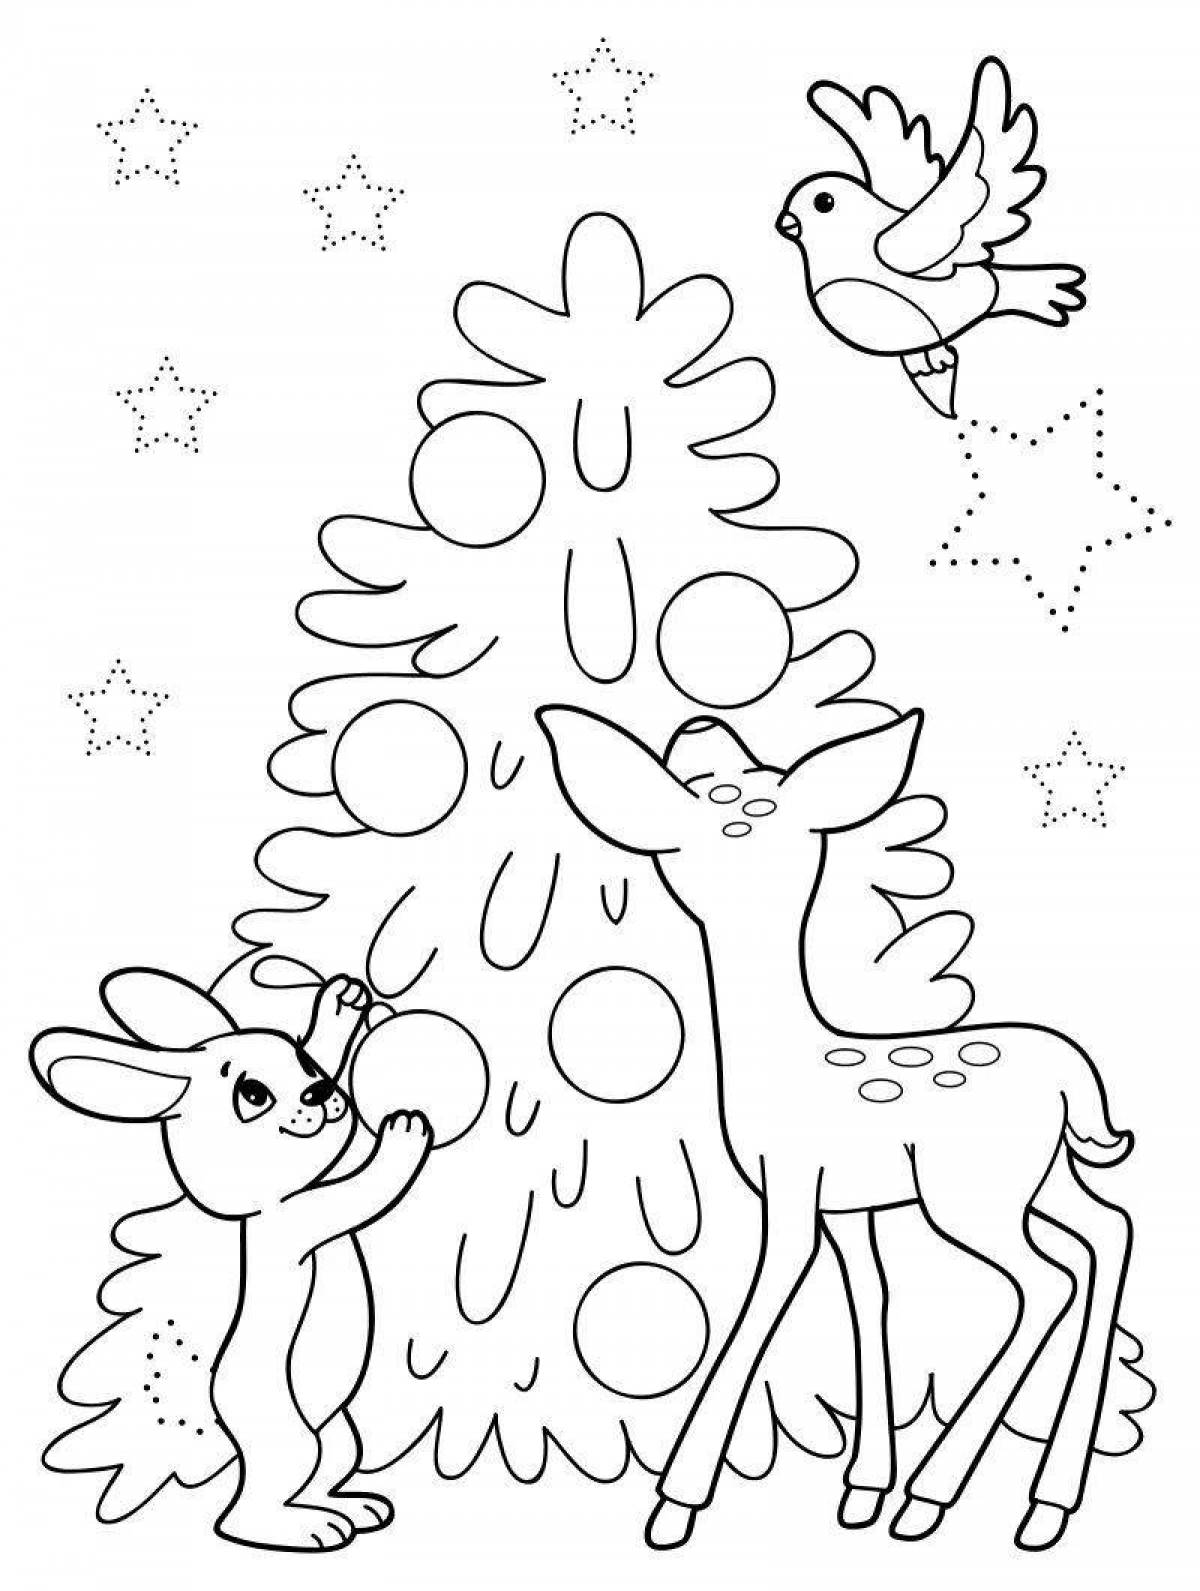 Amazing Christmas coloring book for preschoolers